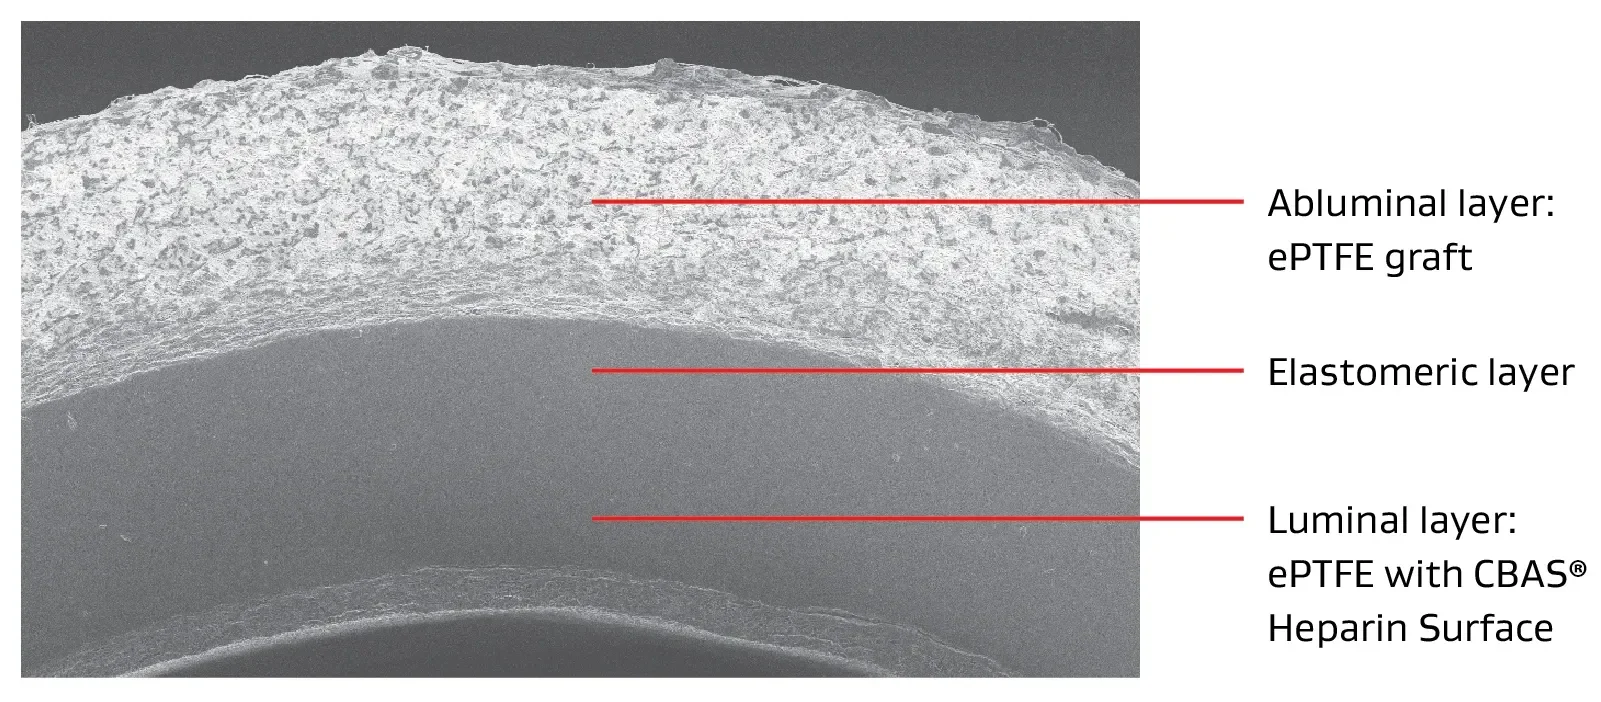 Image showing the tri-layer design of the GORE ACUSEAL Vascular Graft. Abluminal layer (ePTFE graft). Elastomeric layer. Luminal layer (ePTFE with CBAS Heparin Surface).